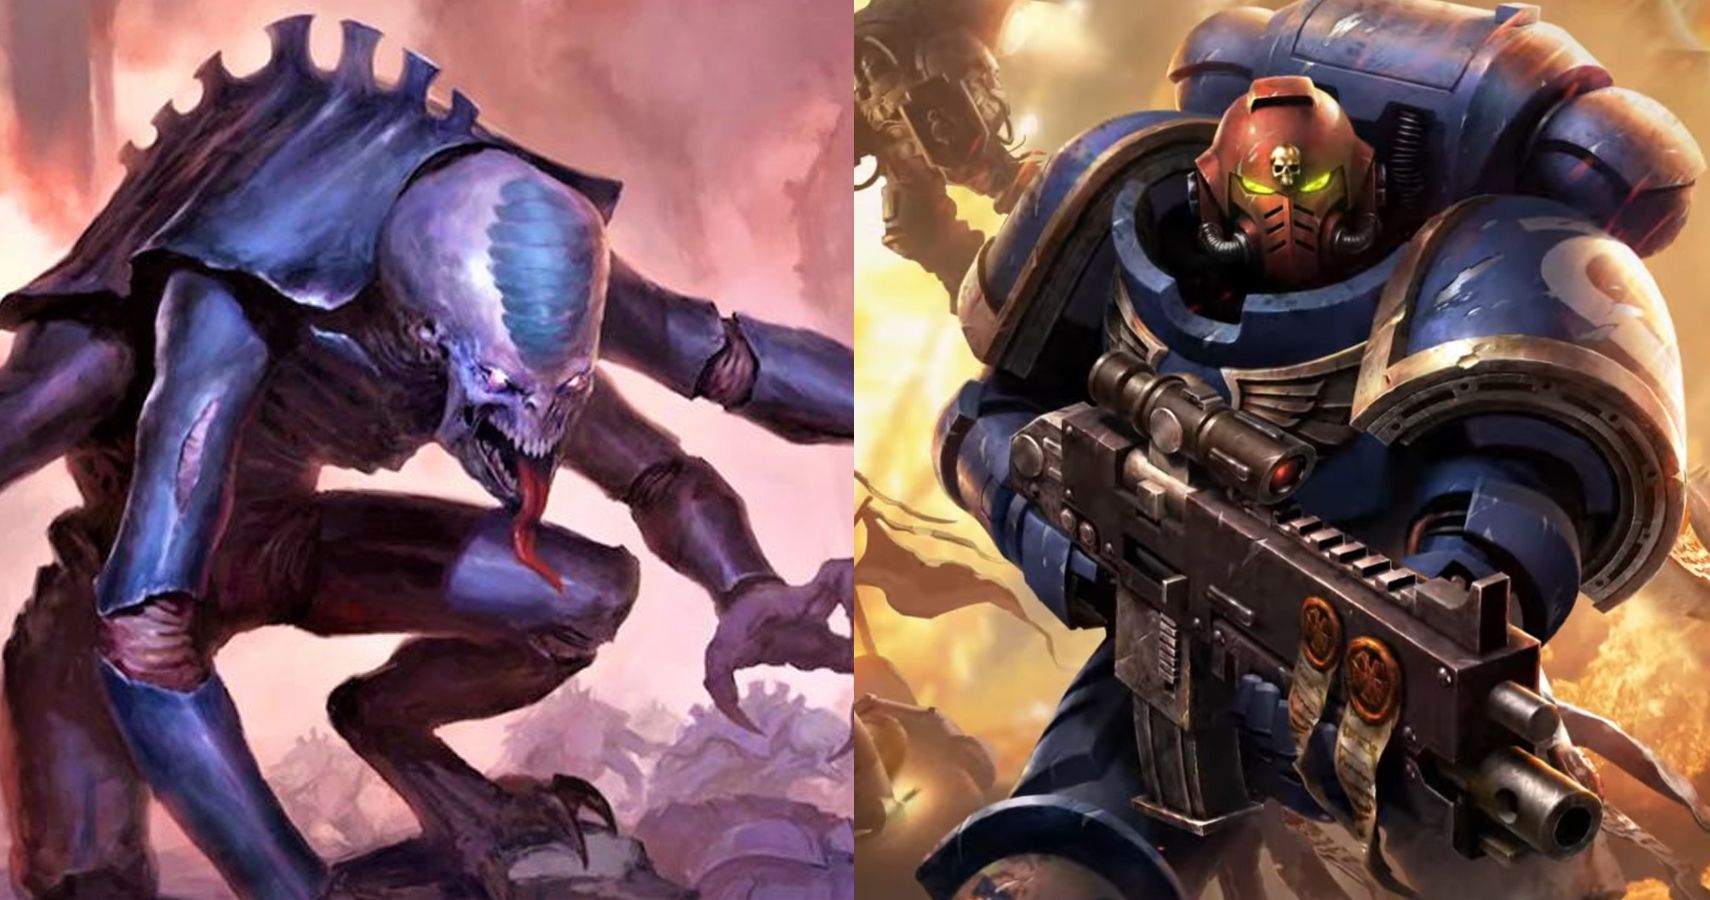 Epic Characters that Define Warhammer 40k